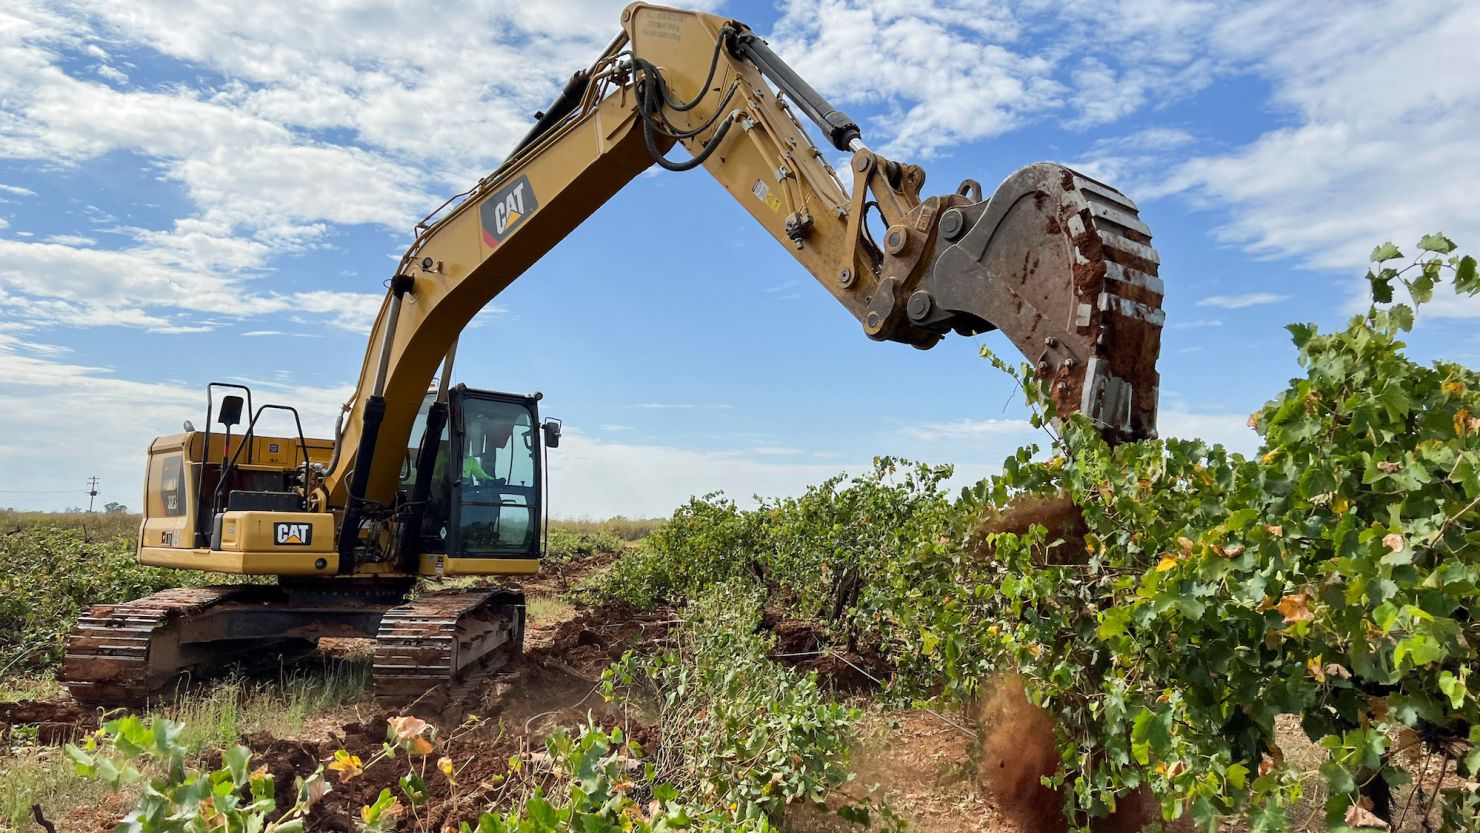 An excavator digs up vines near the town of Griffith in southeast Australia on February 27.